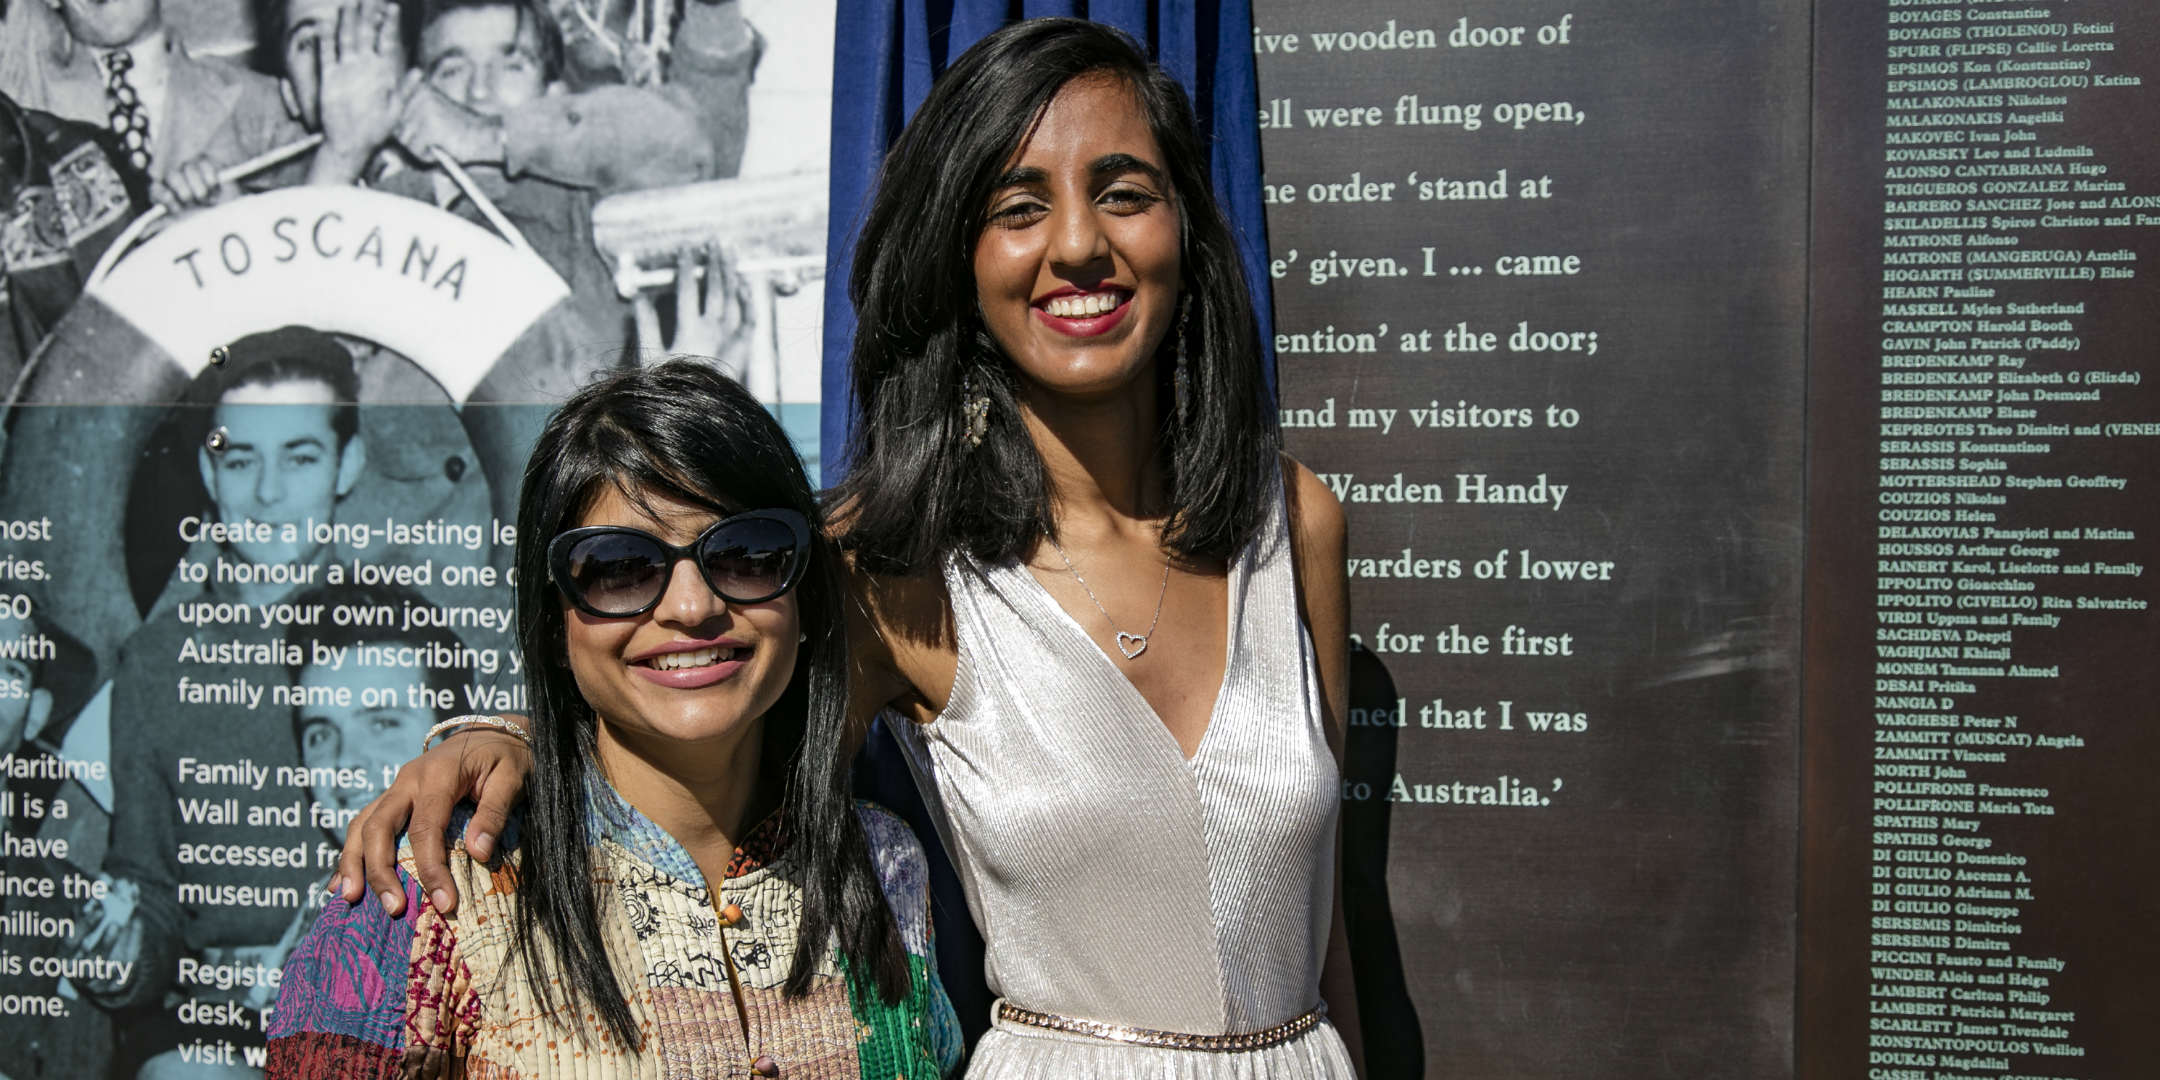 Special Guest Pritika Desai (right), who was named the India Australia Business Community Awards Young Community Achiever of the Year for her work on a youth mental health project, reflected on her Indian heritage at the Welcome Wall unveiling ceremony, 7 May 2017.